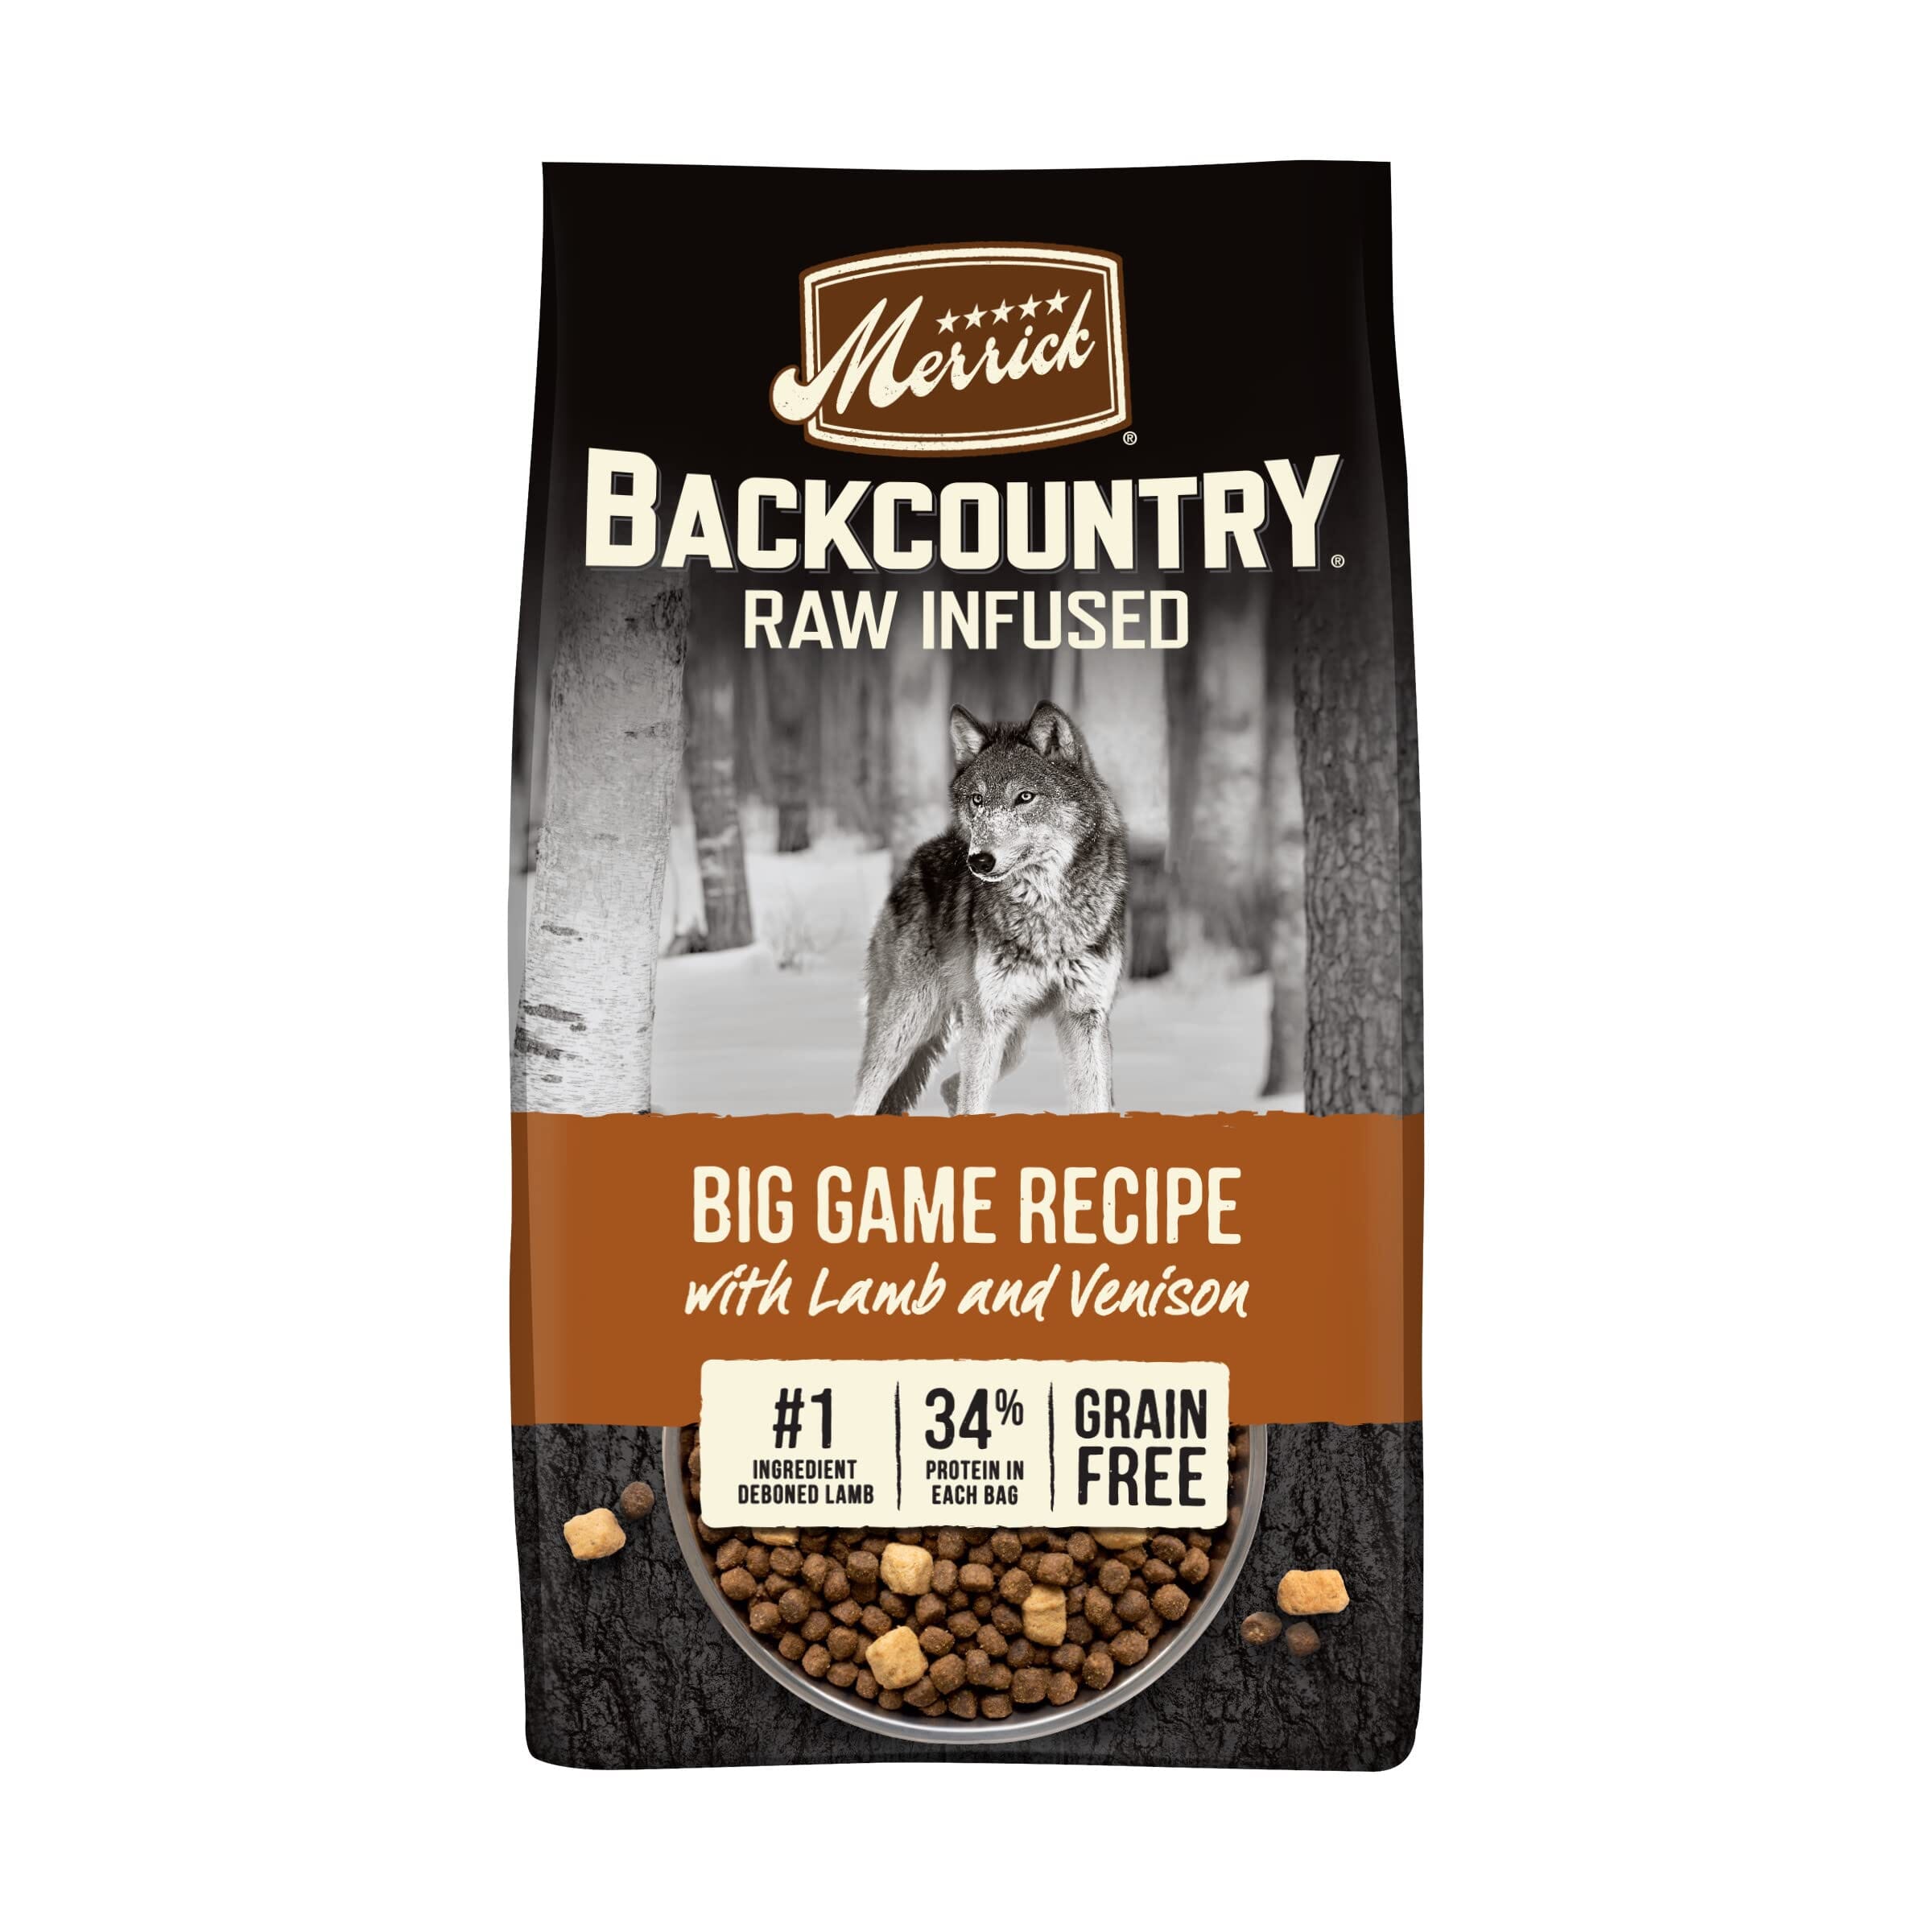 Merrick Backcountry Big Game Grain-Free Raw-Infused Lamb and Venison Freeze-Dried Dog Food - 20 Lbs  